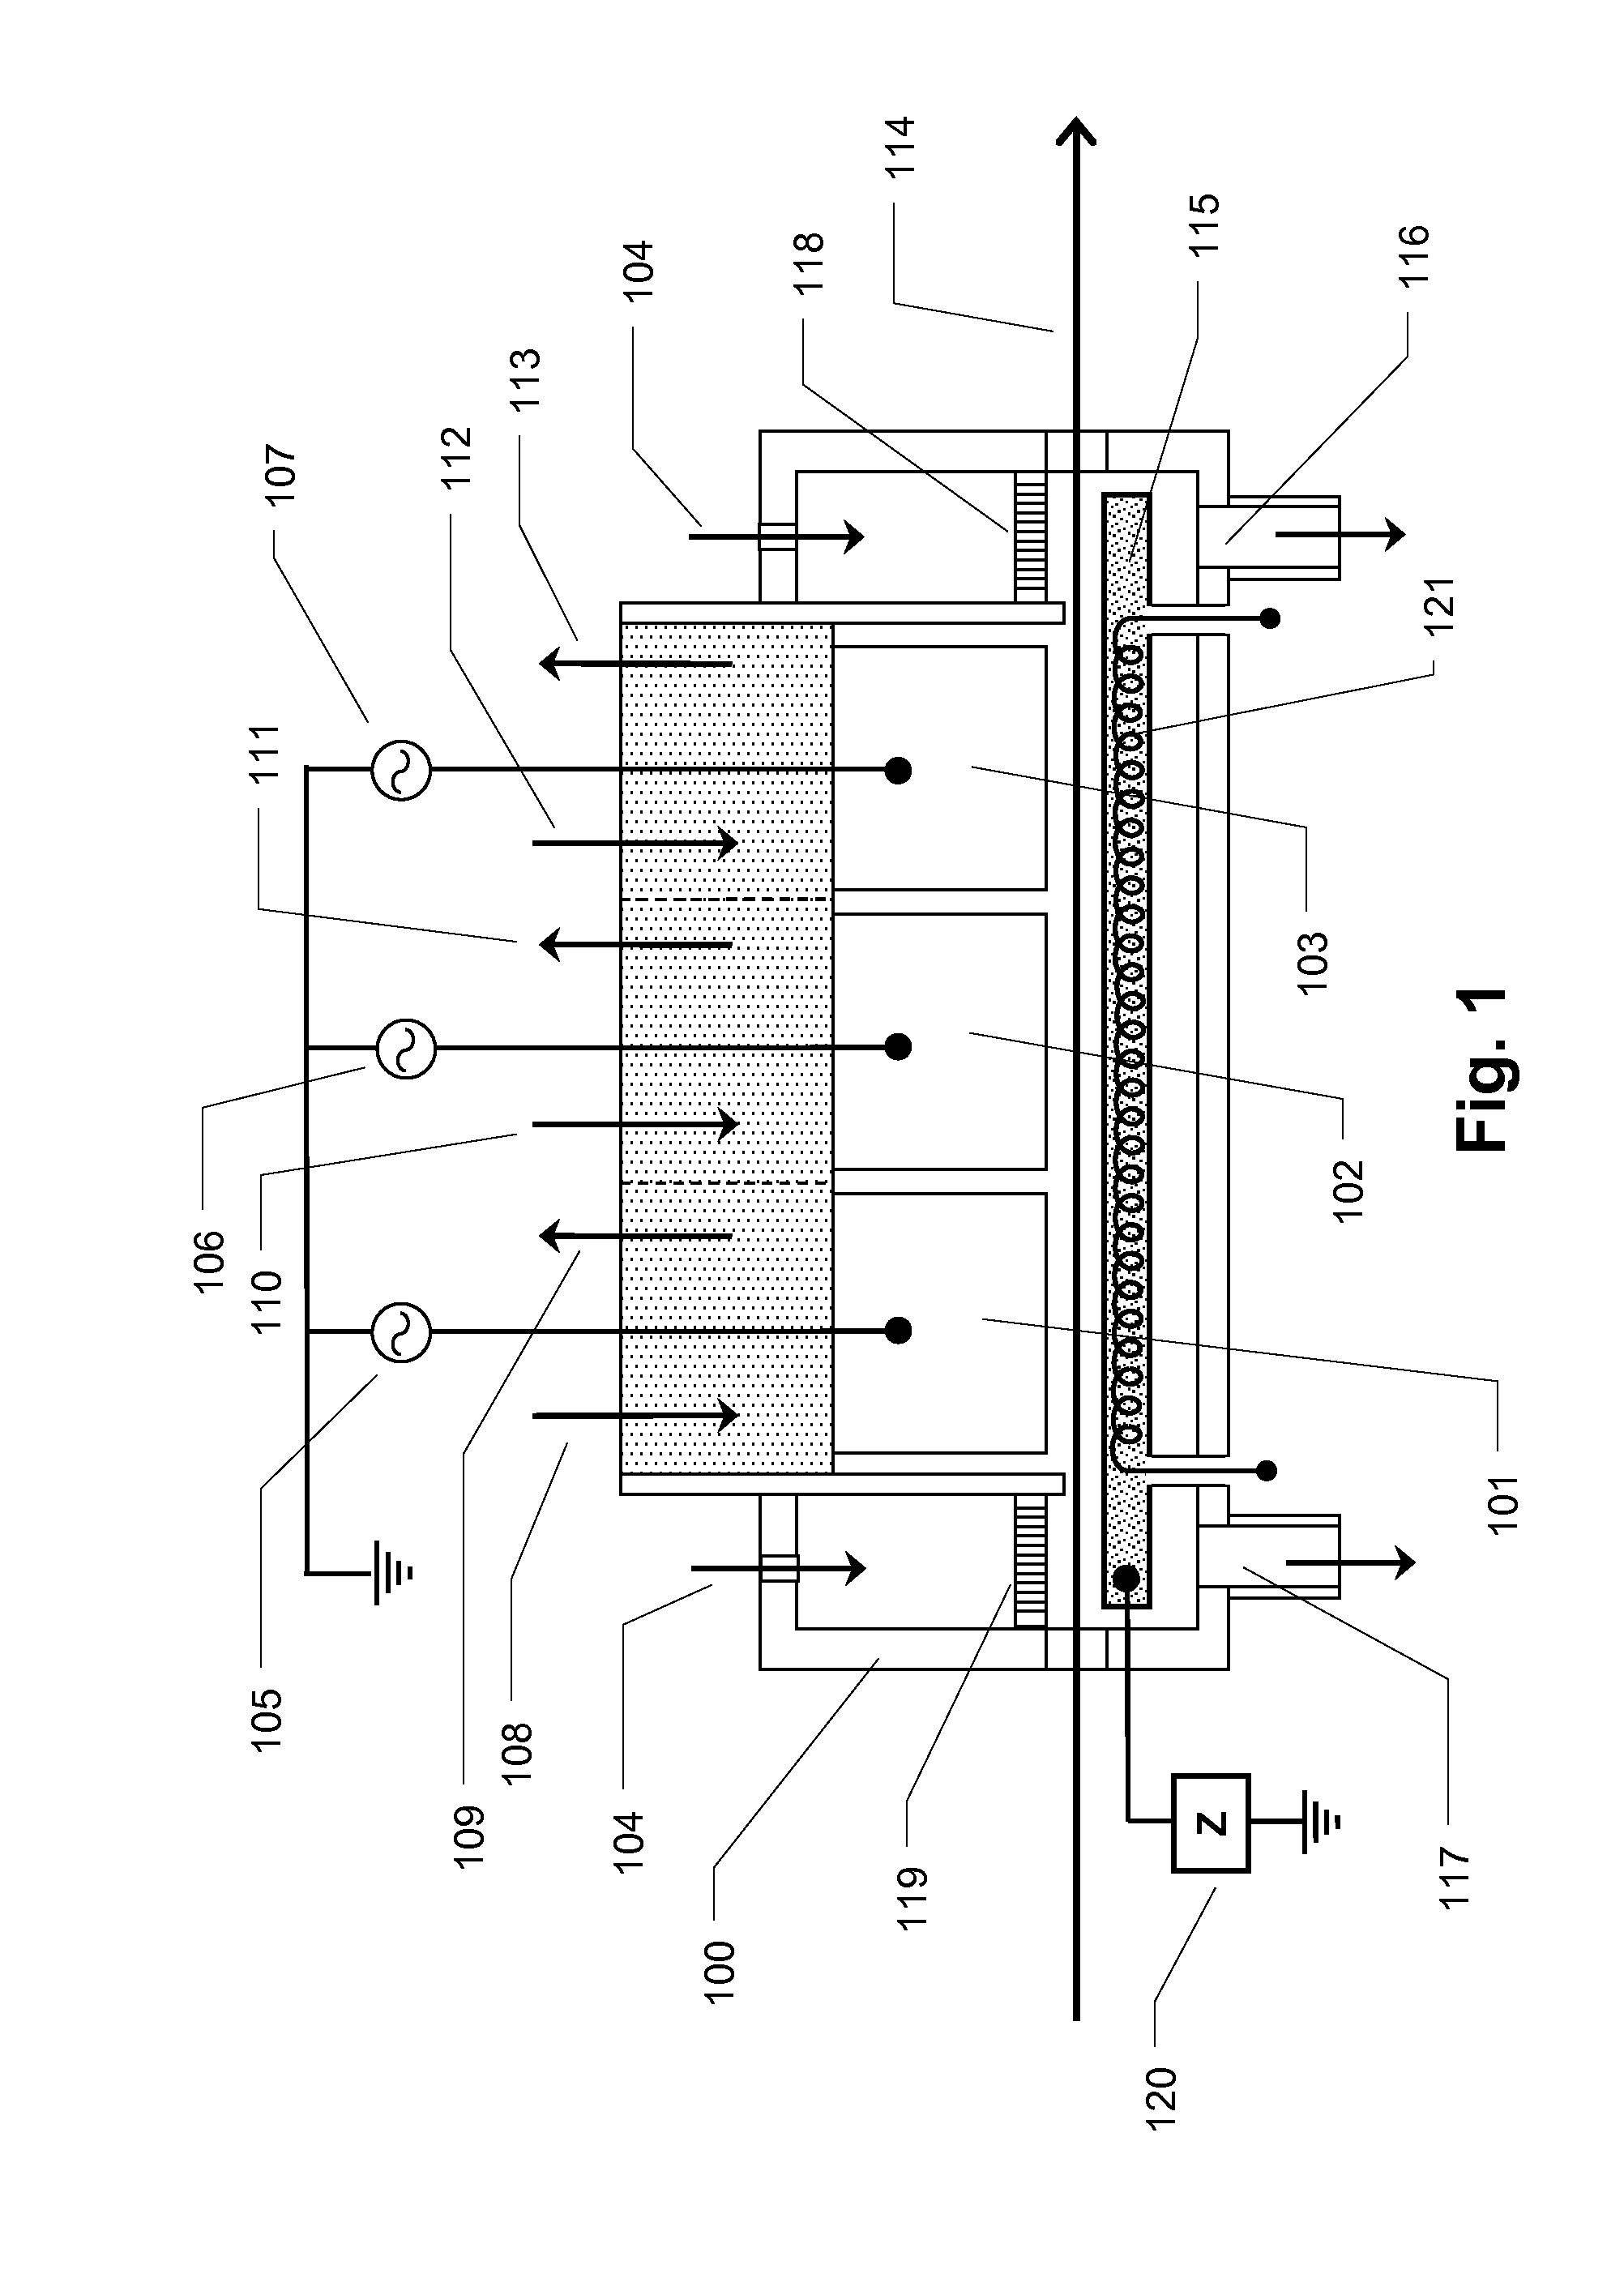 Apparatus and method for forming thin protective and optical layers on substrates